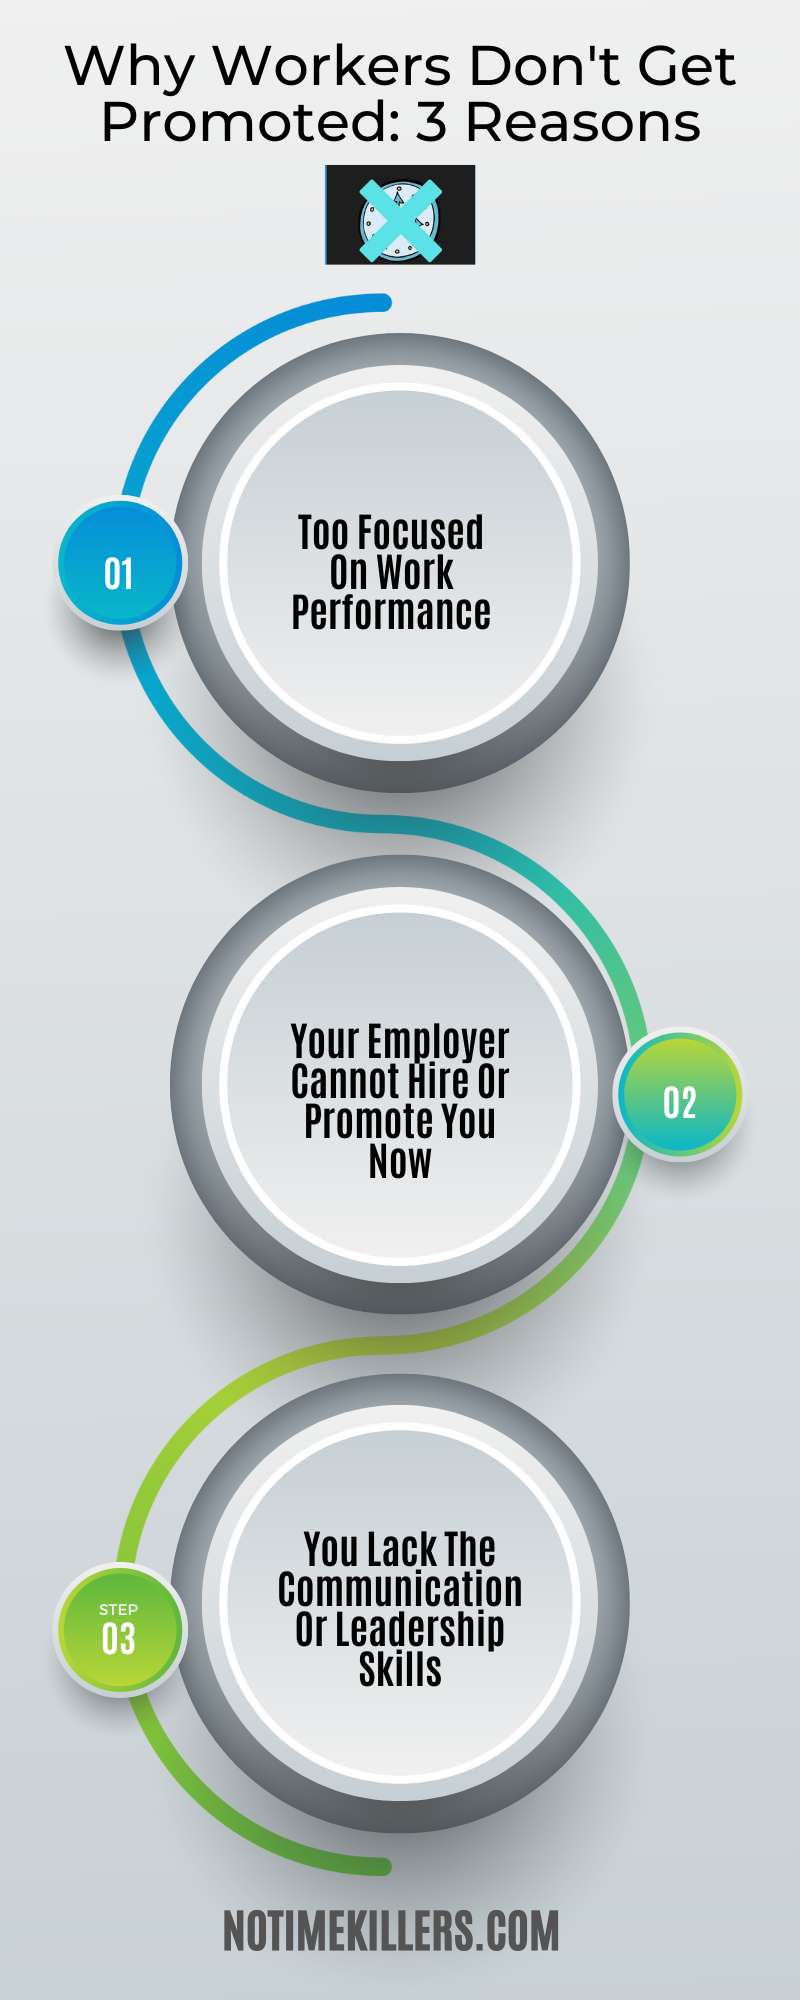 Why workers don't get promoted? This graph lays out some reasons why you may not get promoted.